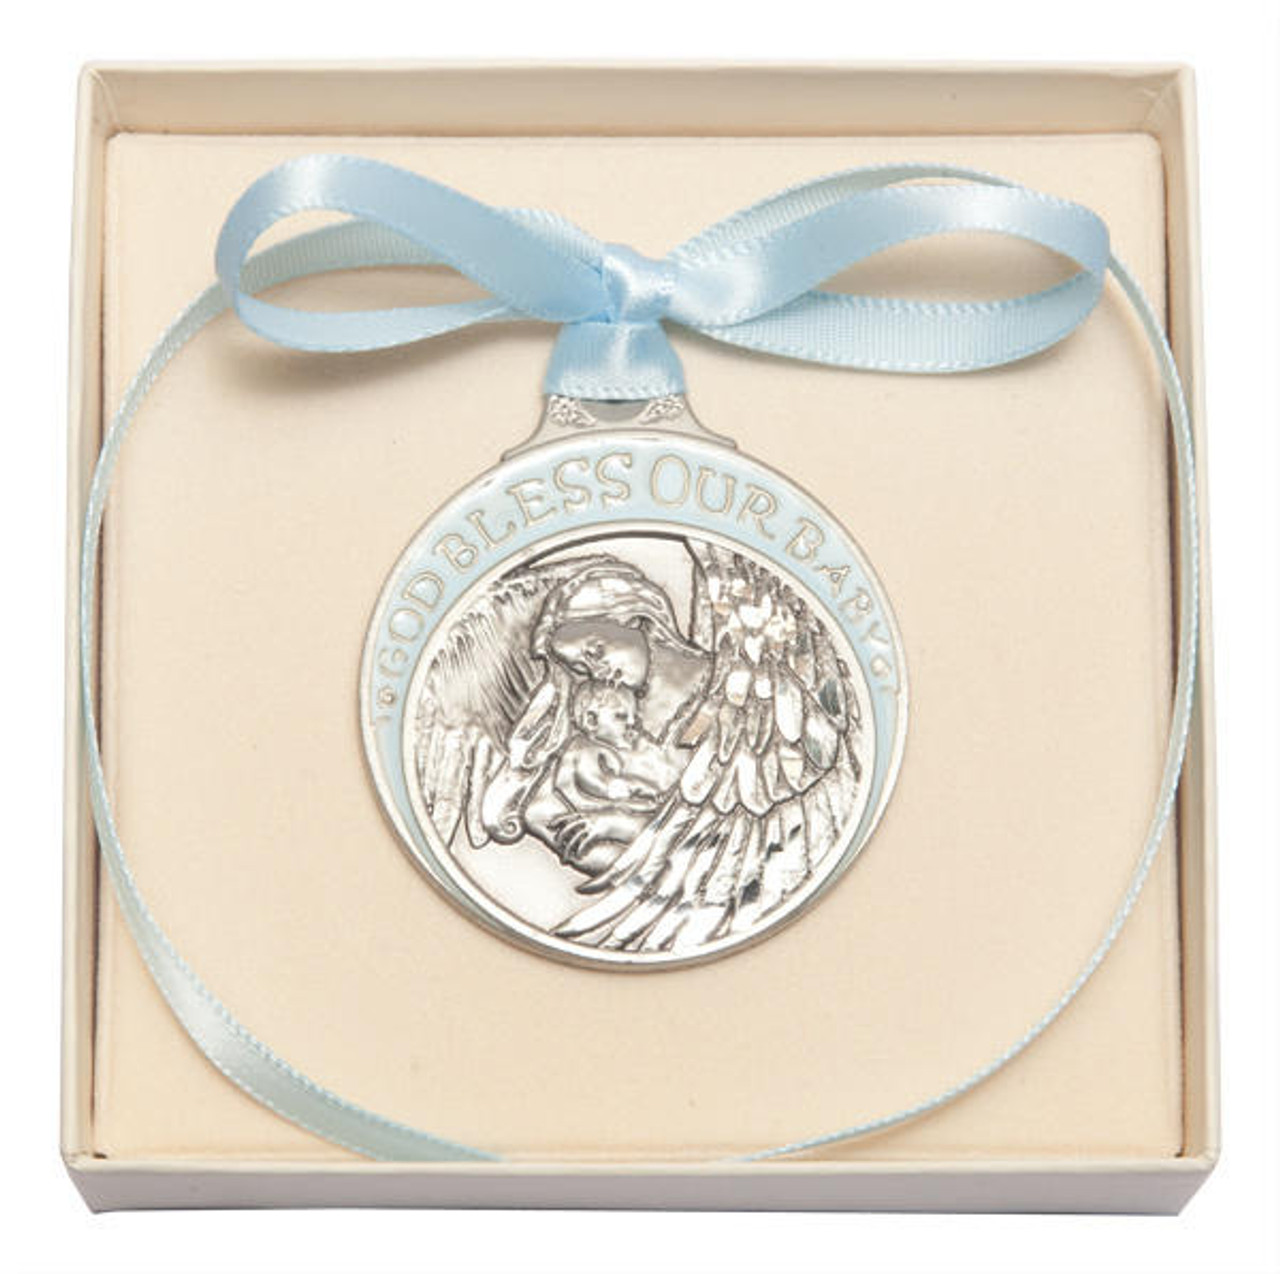 F1141 Guardian Angel Moulded Crib Medal for Baby Nursery Room 3 1/4" Blue 